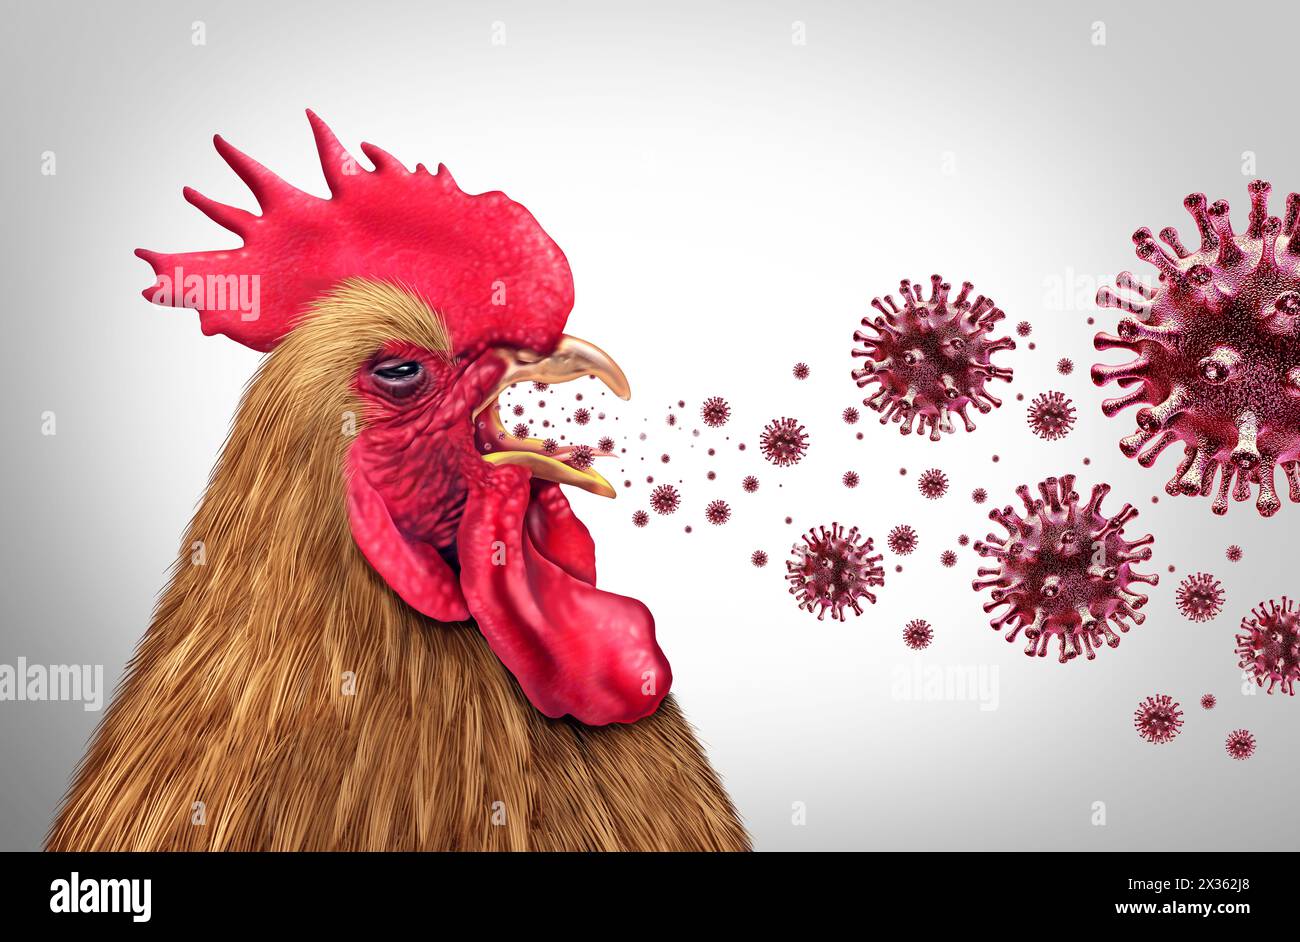 Spreading Bird Flu and Highly Pathogenic Avian Influenza or HPAI crisis and farm virus as a viral poultry infected chicken or livestock health risk fo Stock Photo